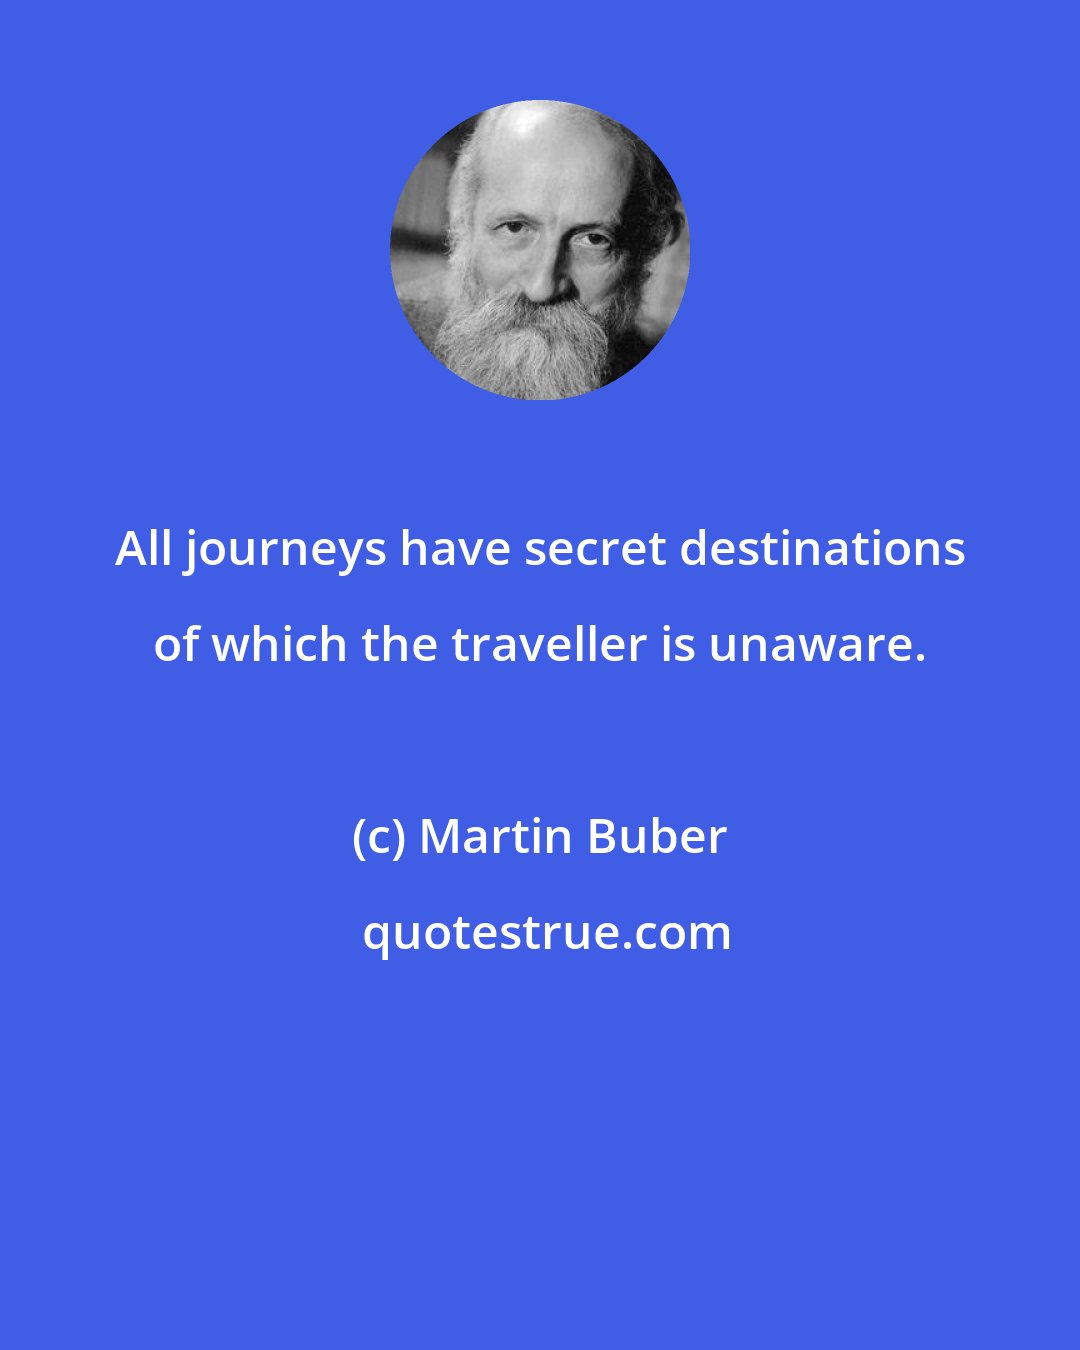 Martin Buber: All journeys have secret destinations of which the traveller is unaware.